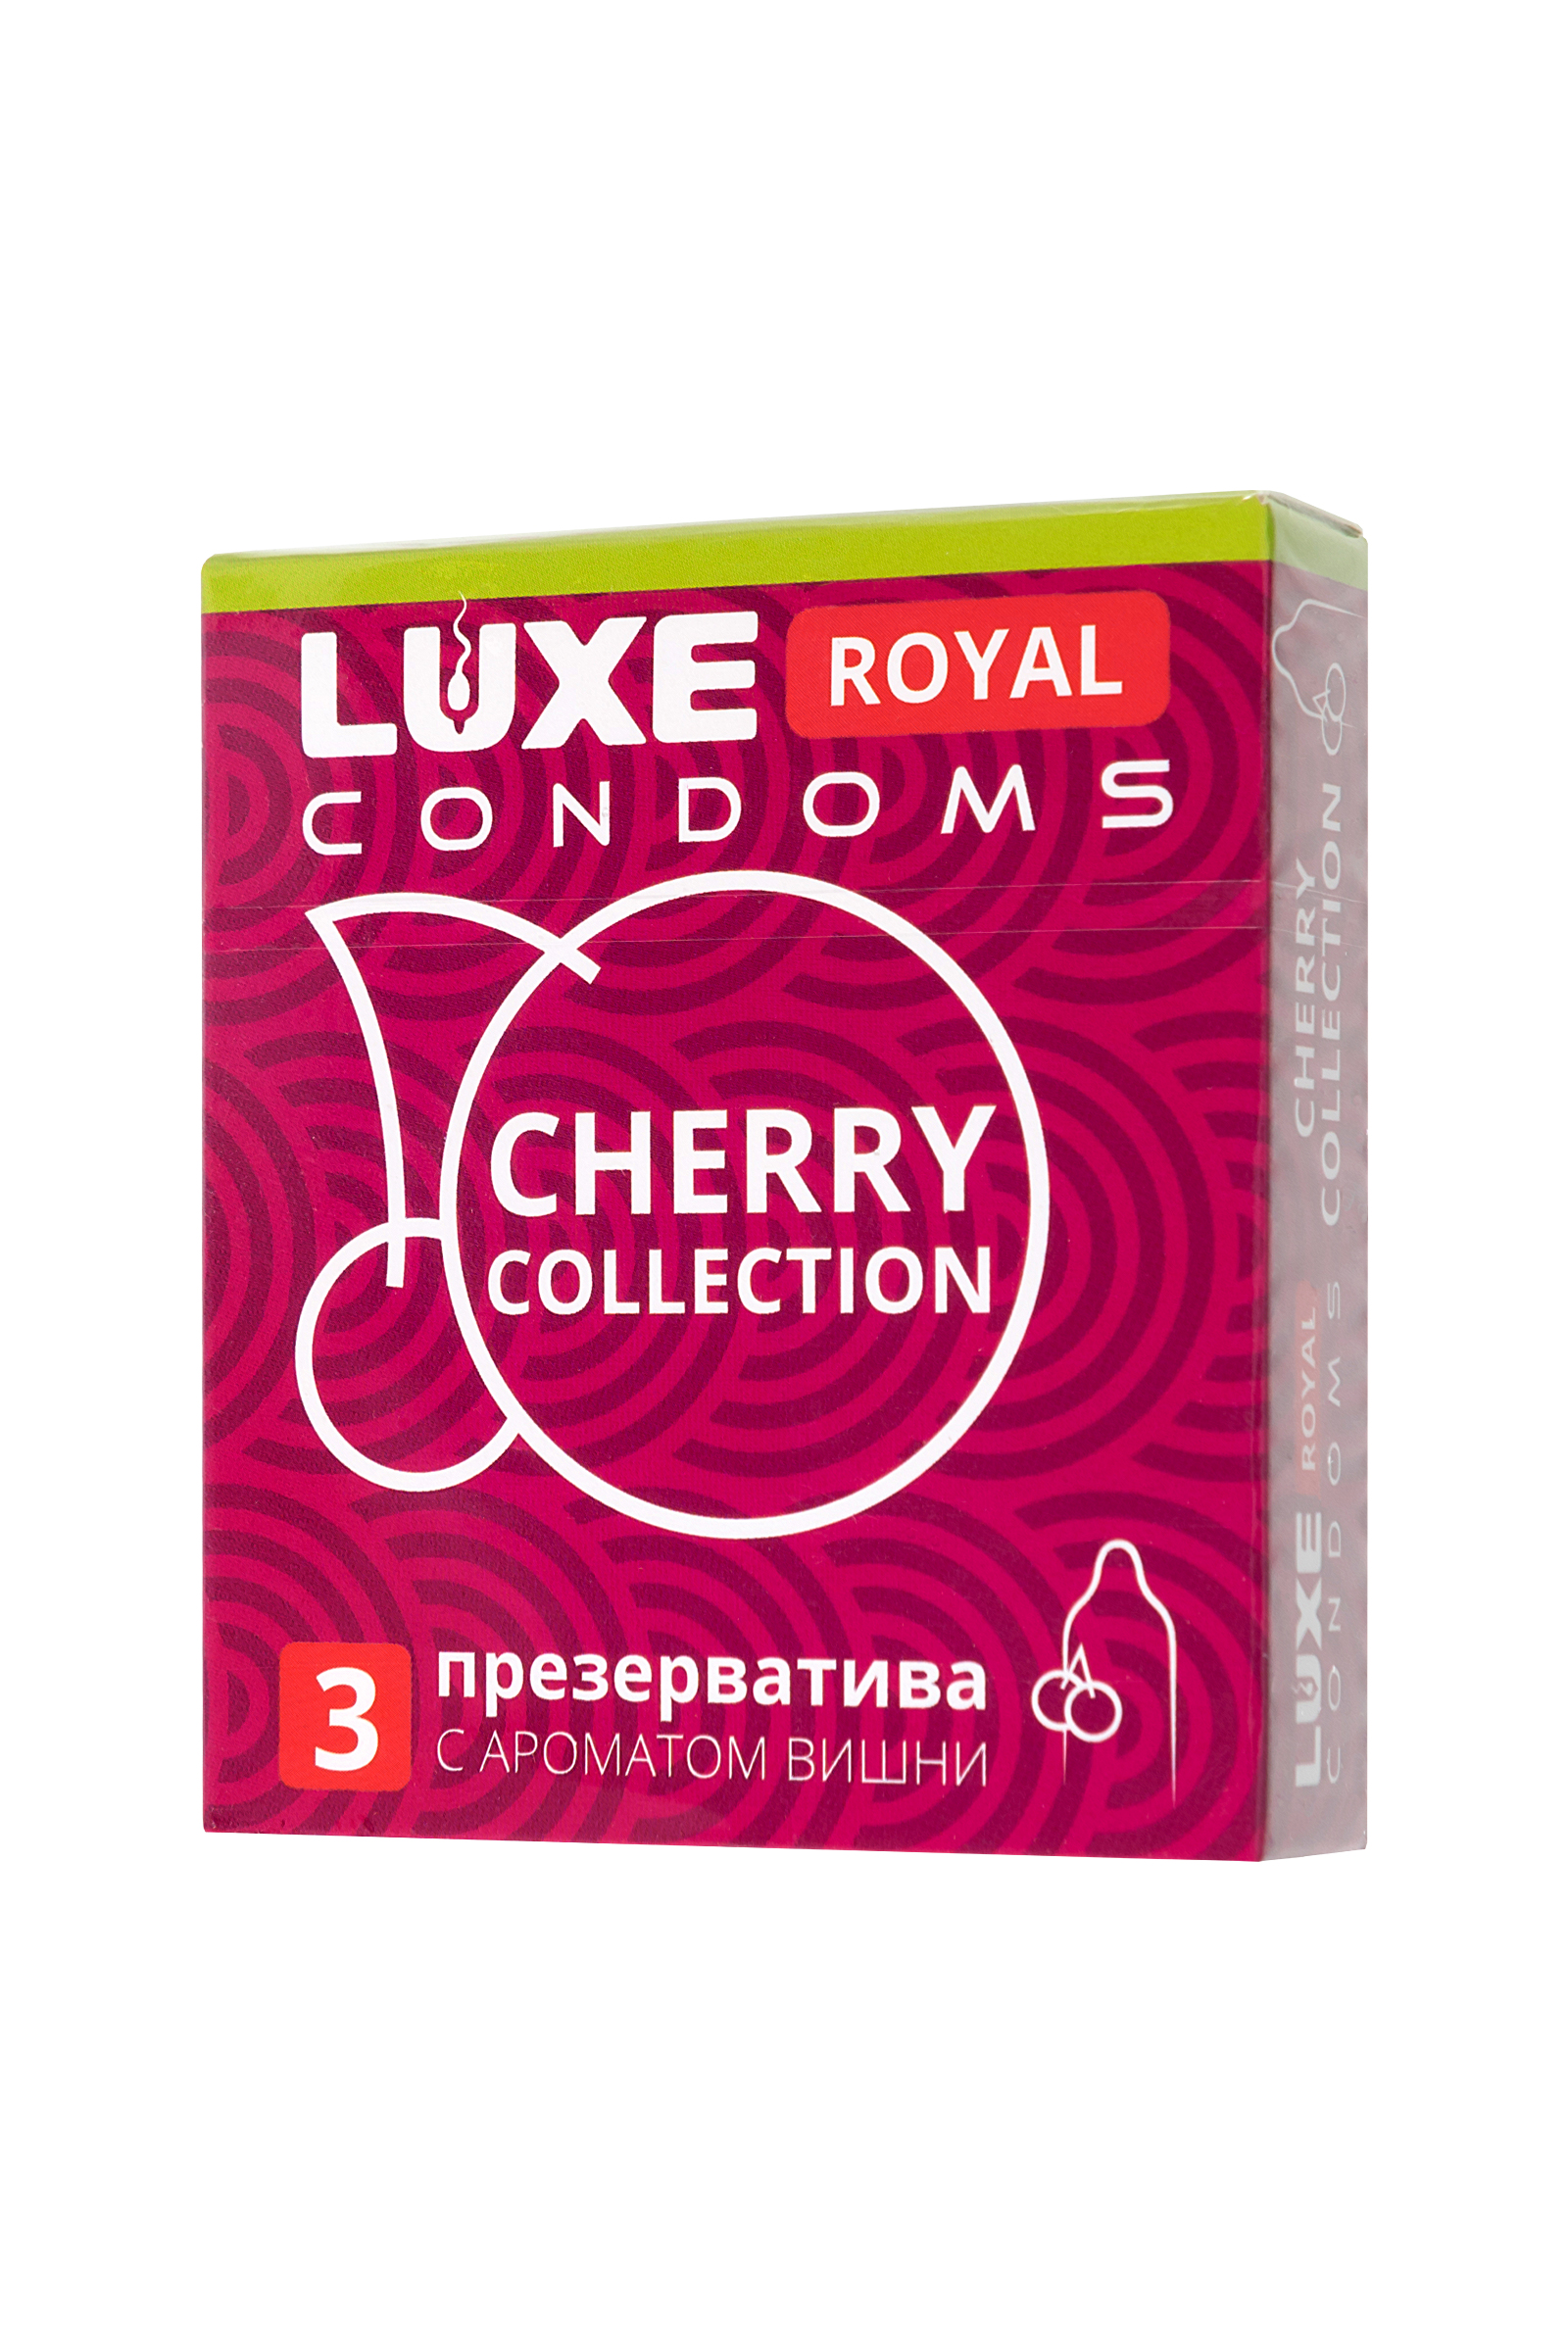 Cherry collection. Luxe Royal condoms. Luxe Royal презервативы вишня. Royal черри. Презервативы Сагами клубничные.